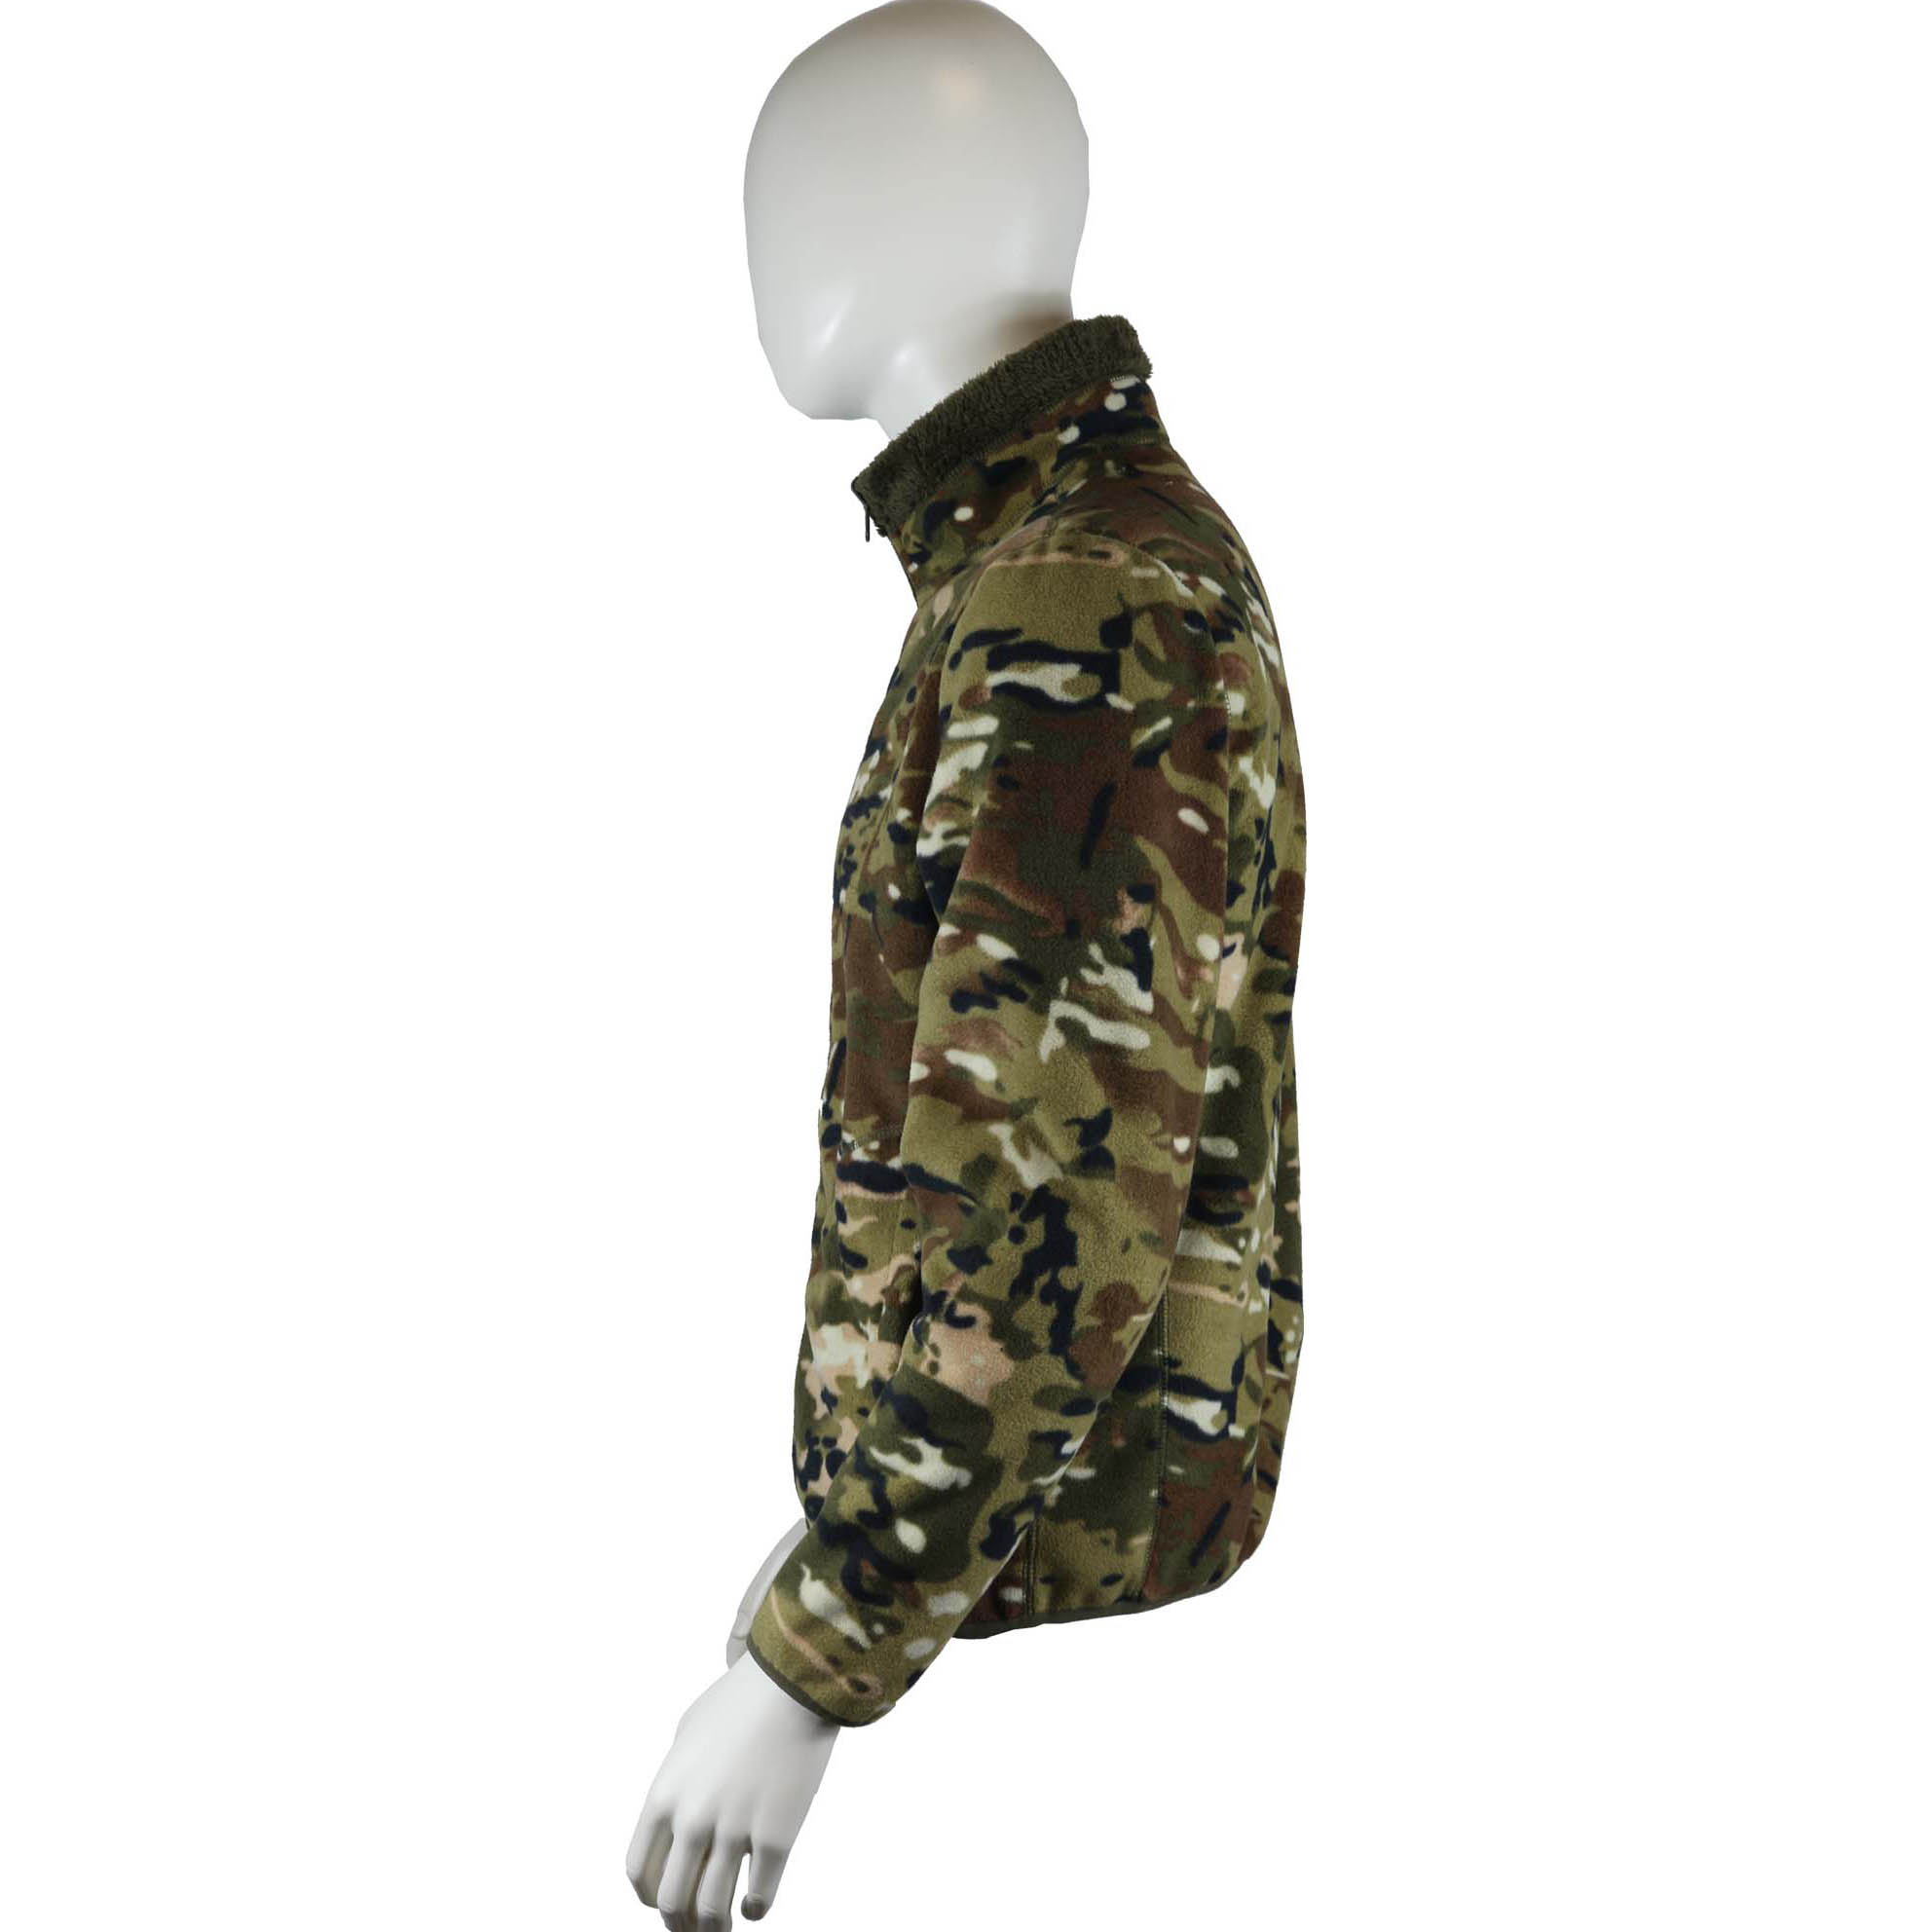 Army Waterproof and Breathable Jacket